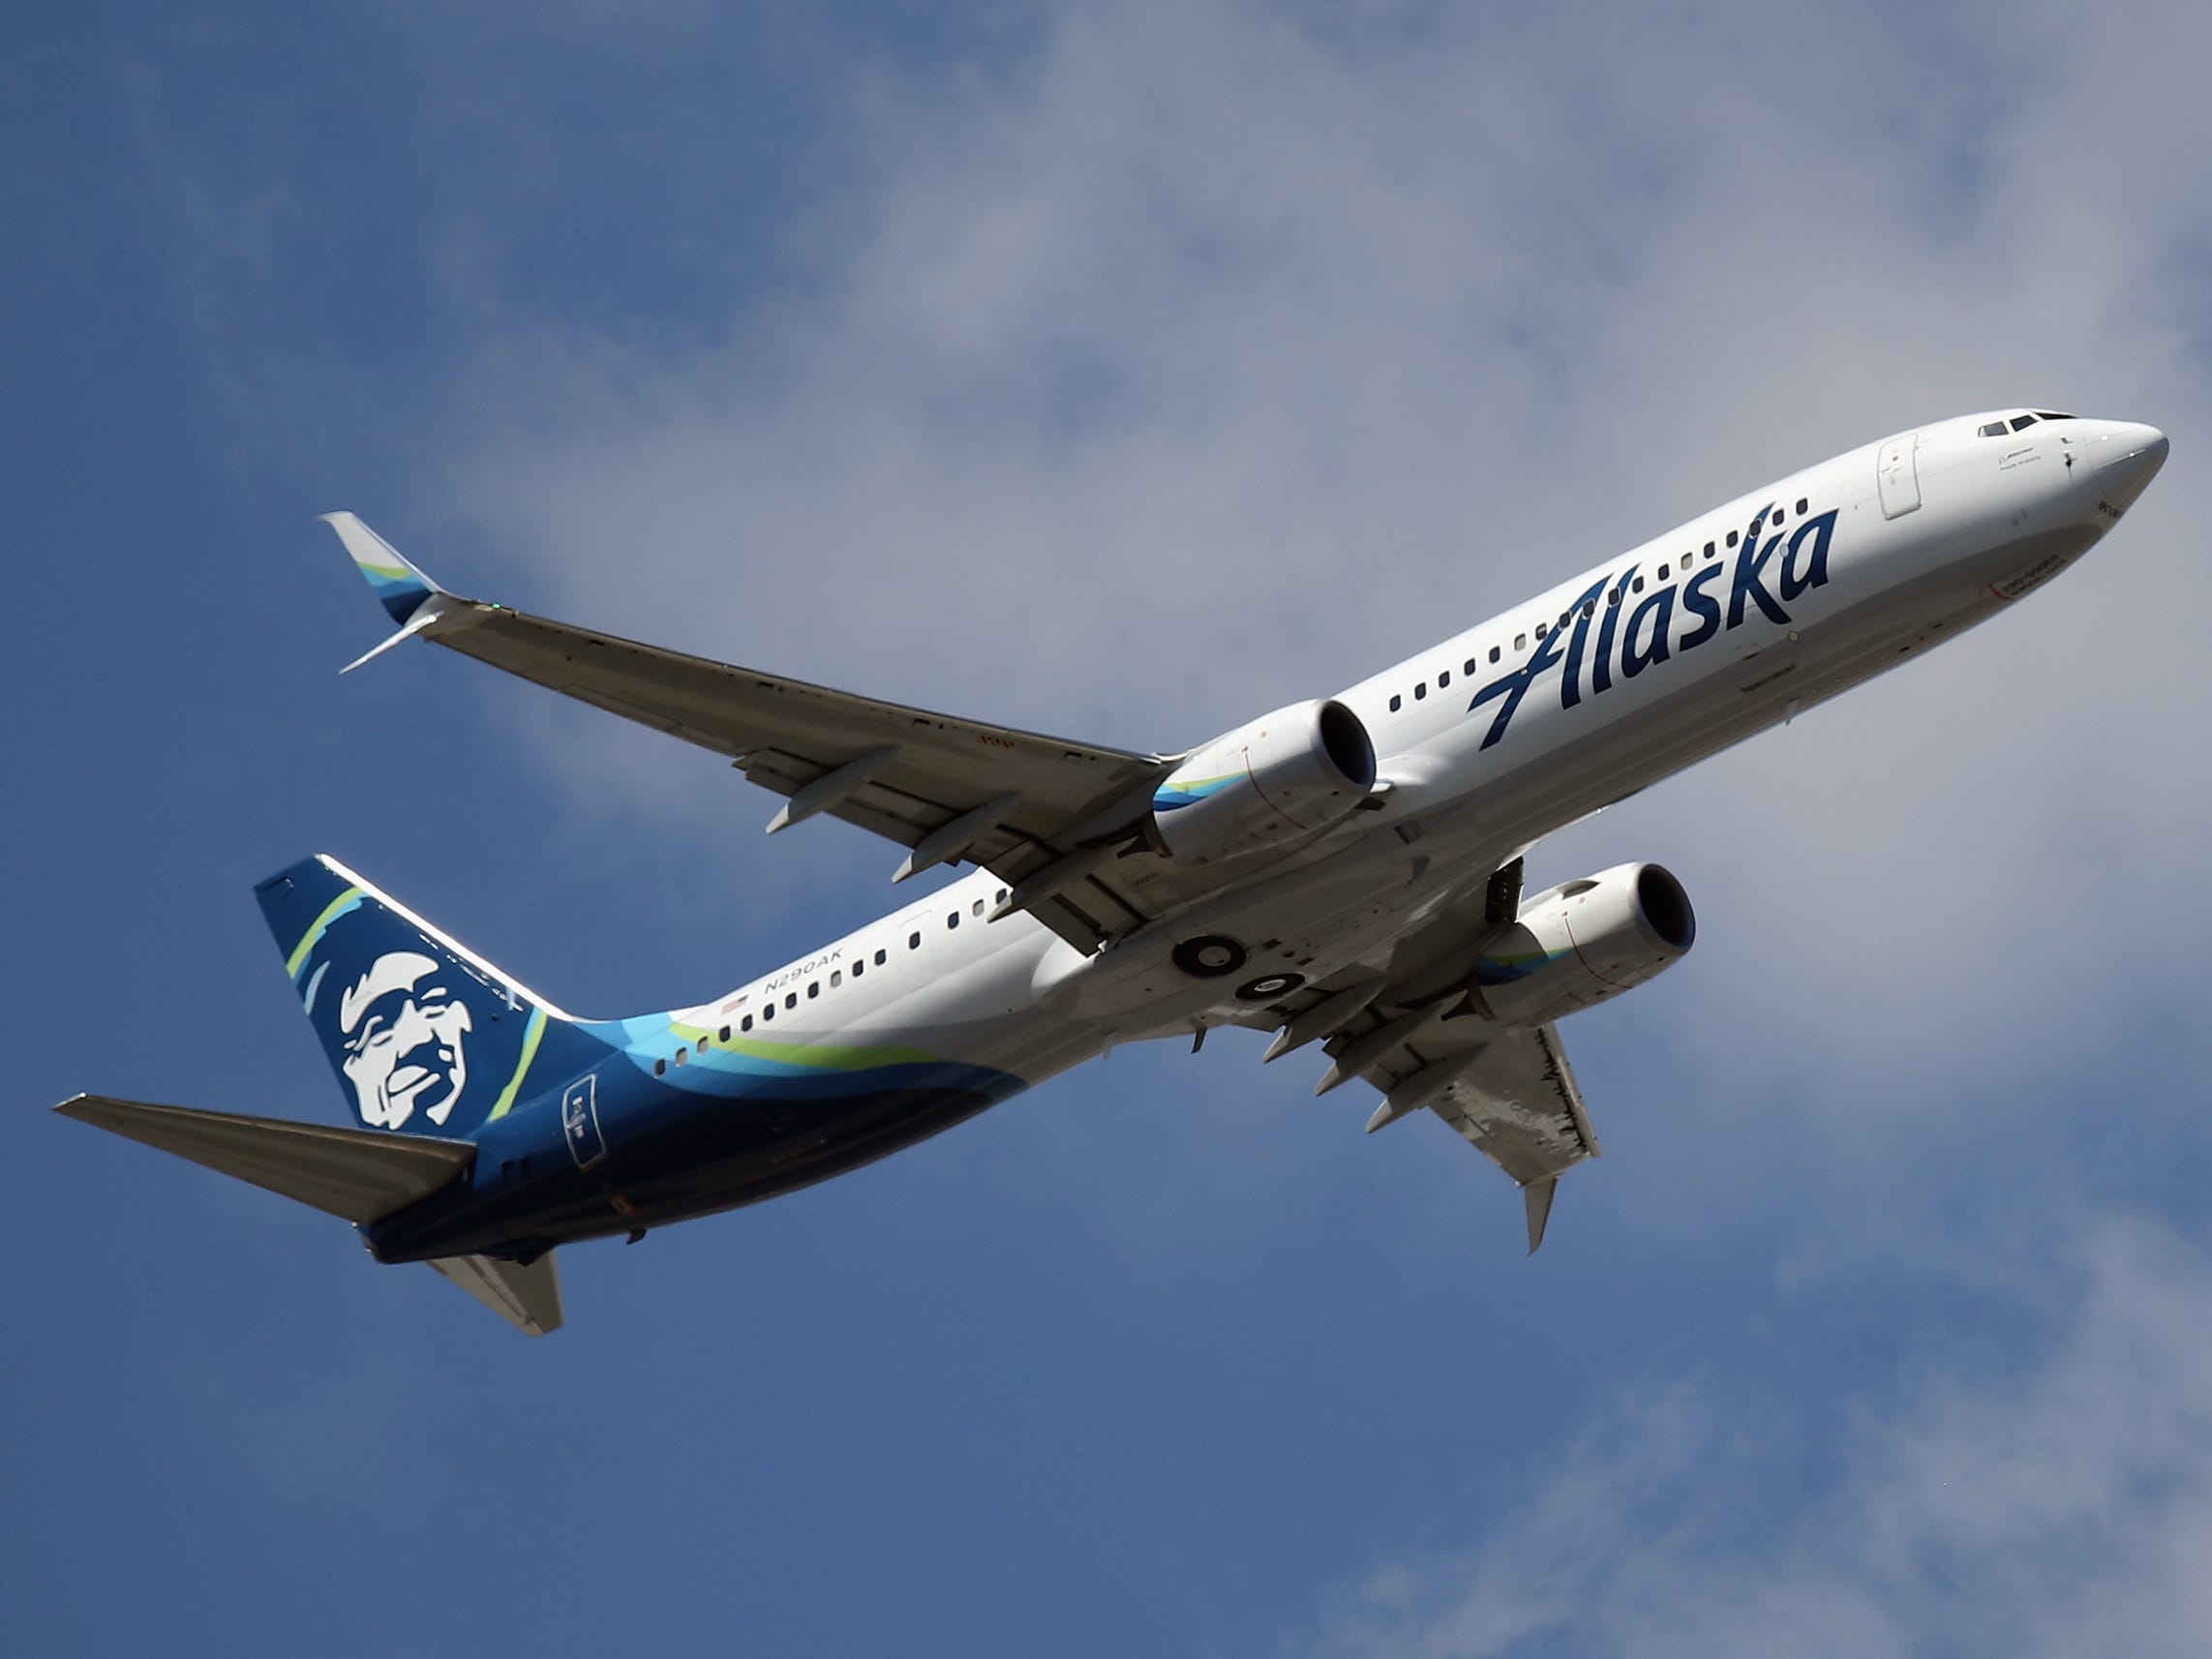 An Alaska Airlines airplane taking off against a blue sky with white clouds.